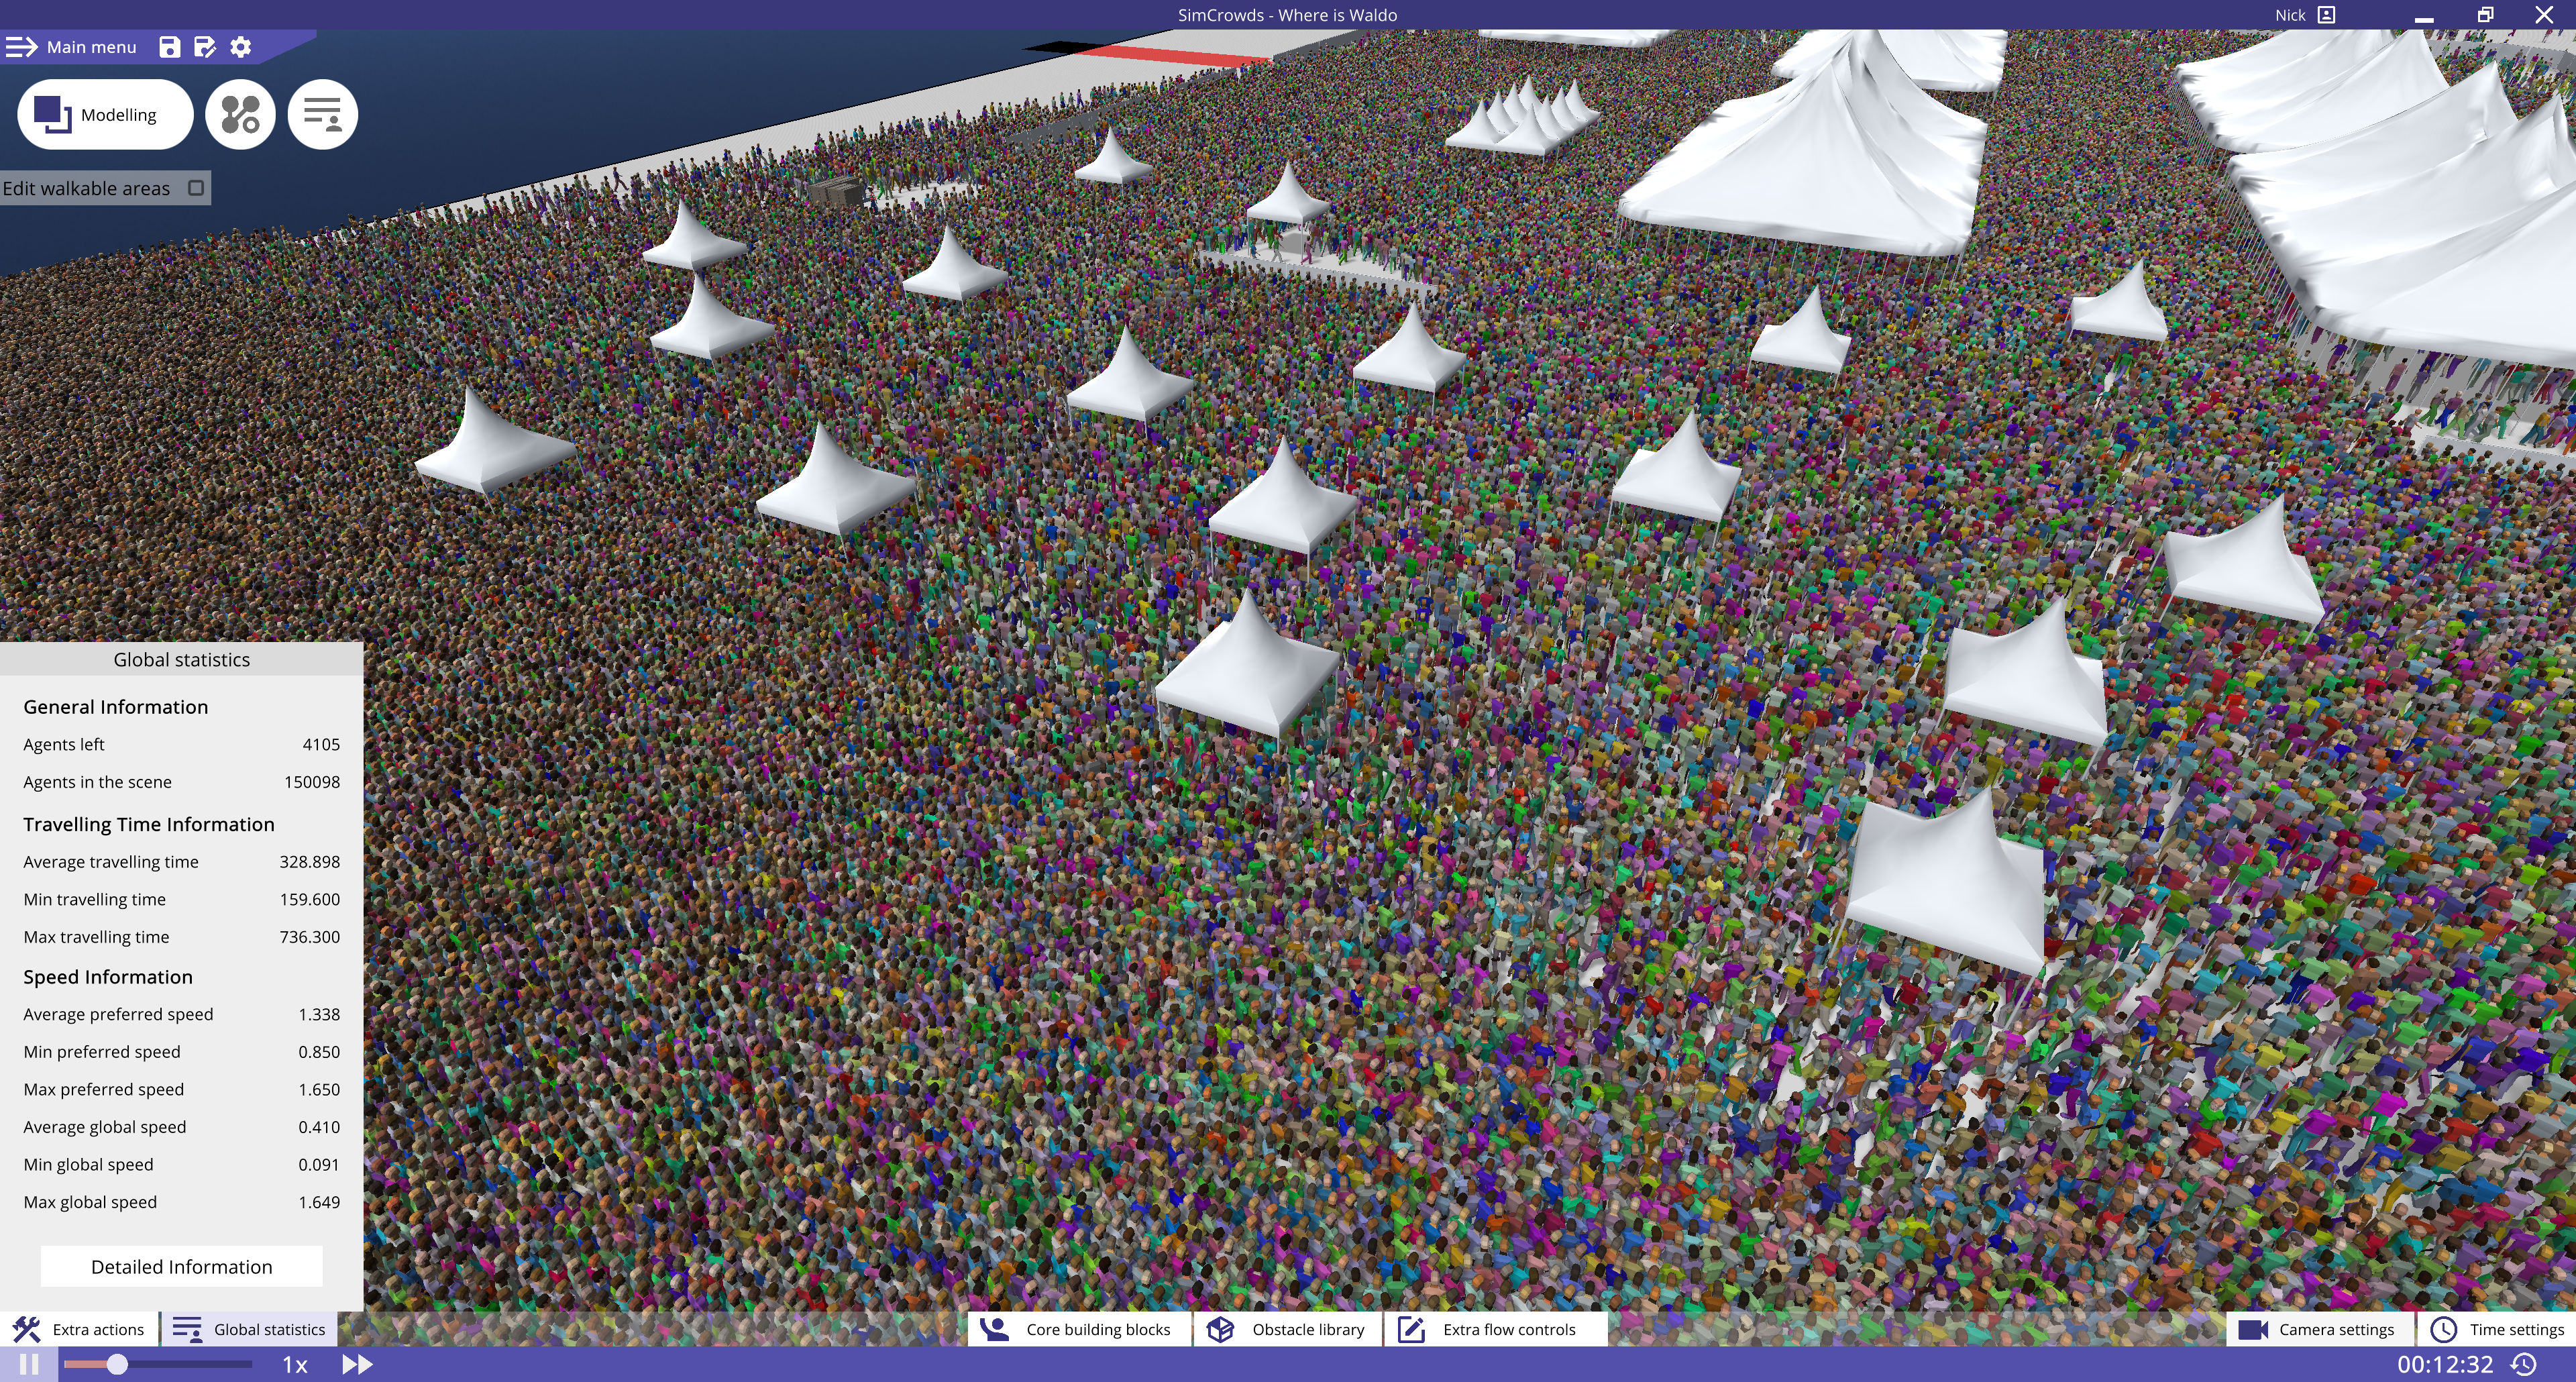 Find Waldo in a crowd of 150000 people in SimCrowds - 2